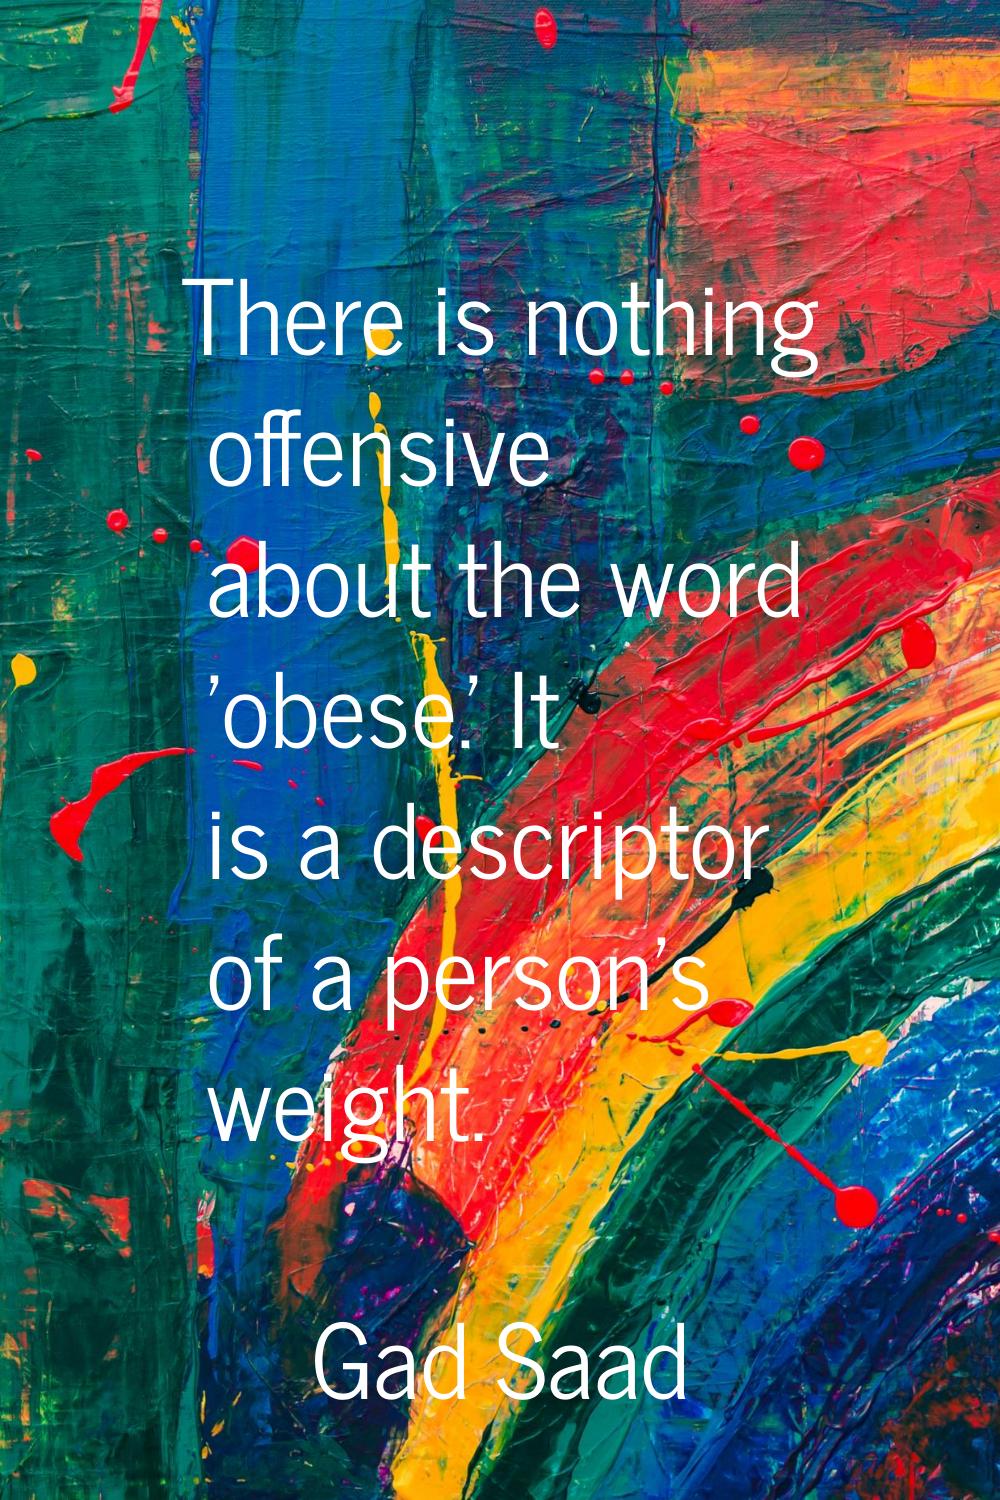 There is nothing offensive about the word 'obese.' It is a descriptor of a person's weight.